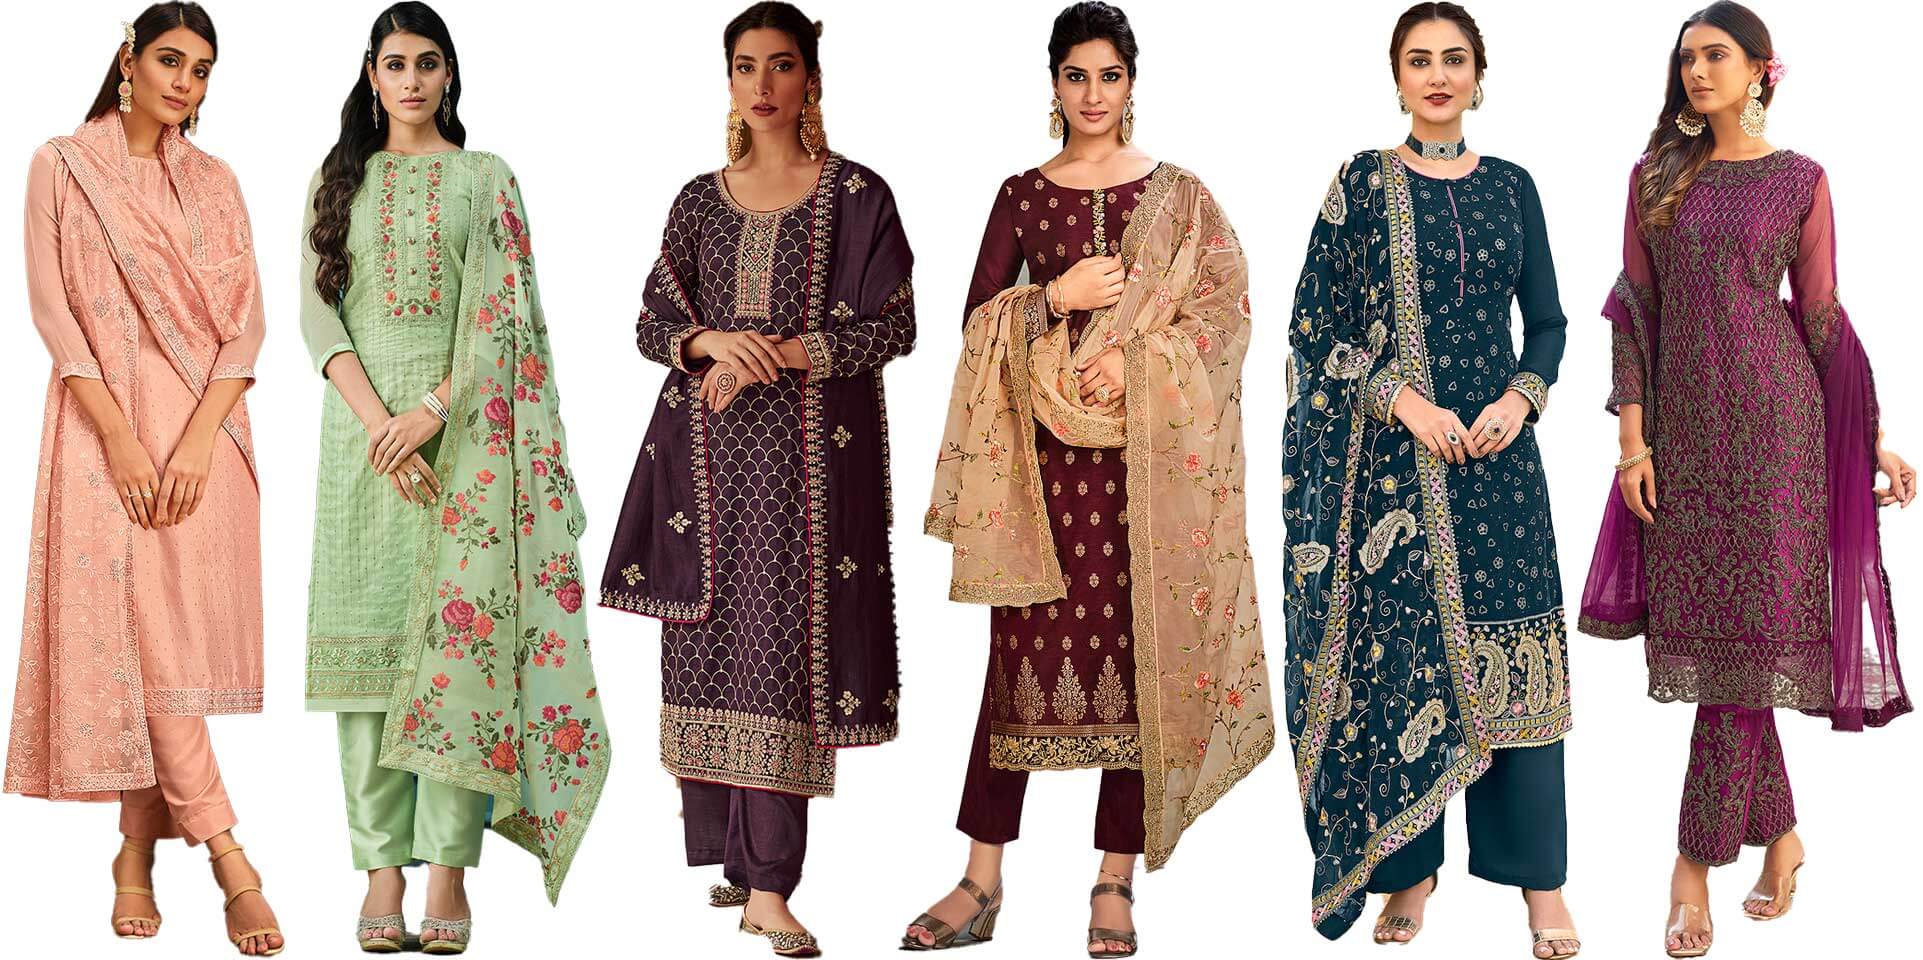 What is a Churidar Suit? What is the Best Place to Buy Churidar Suits in USA?